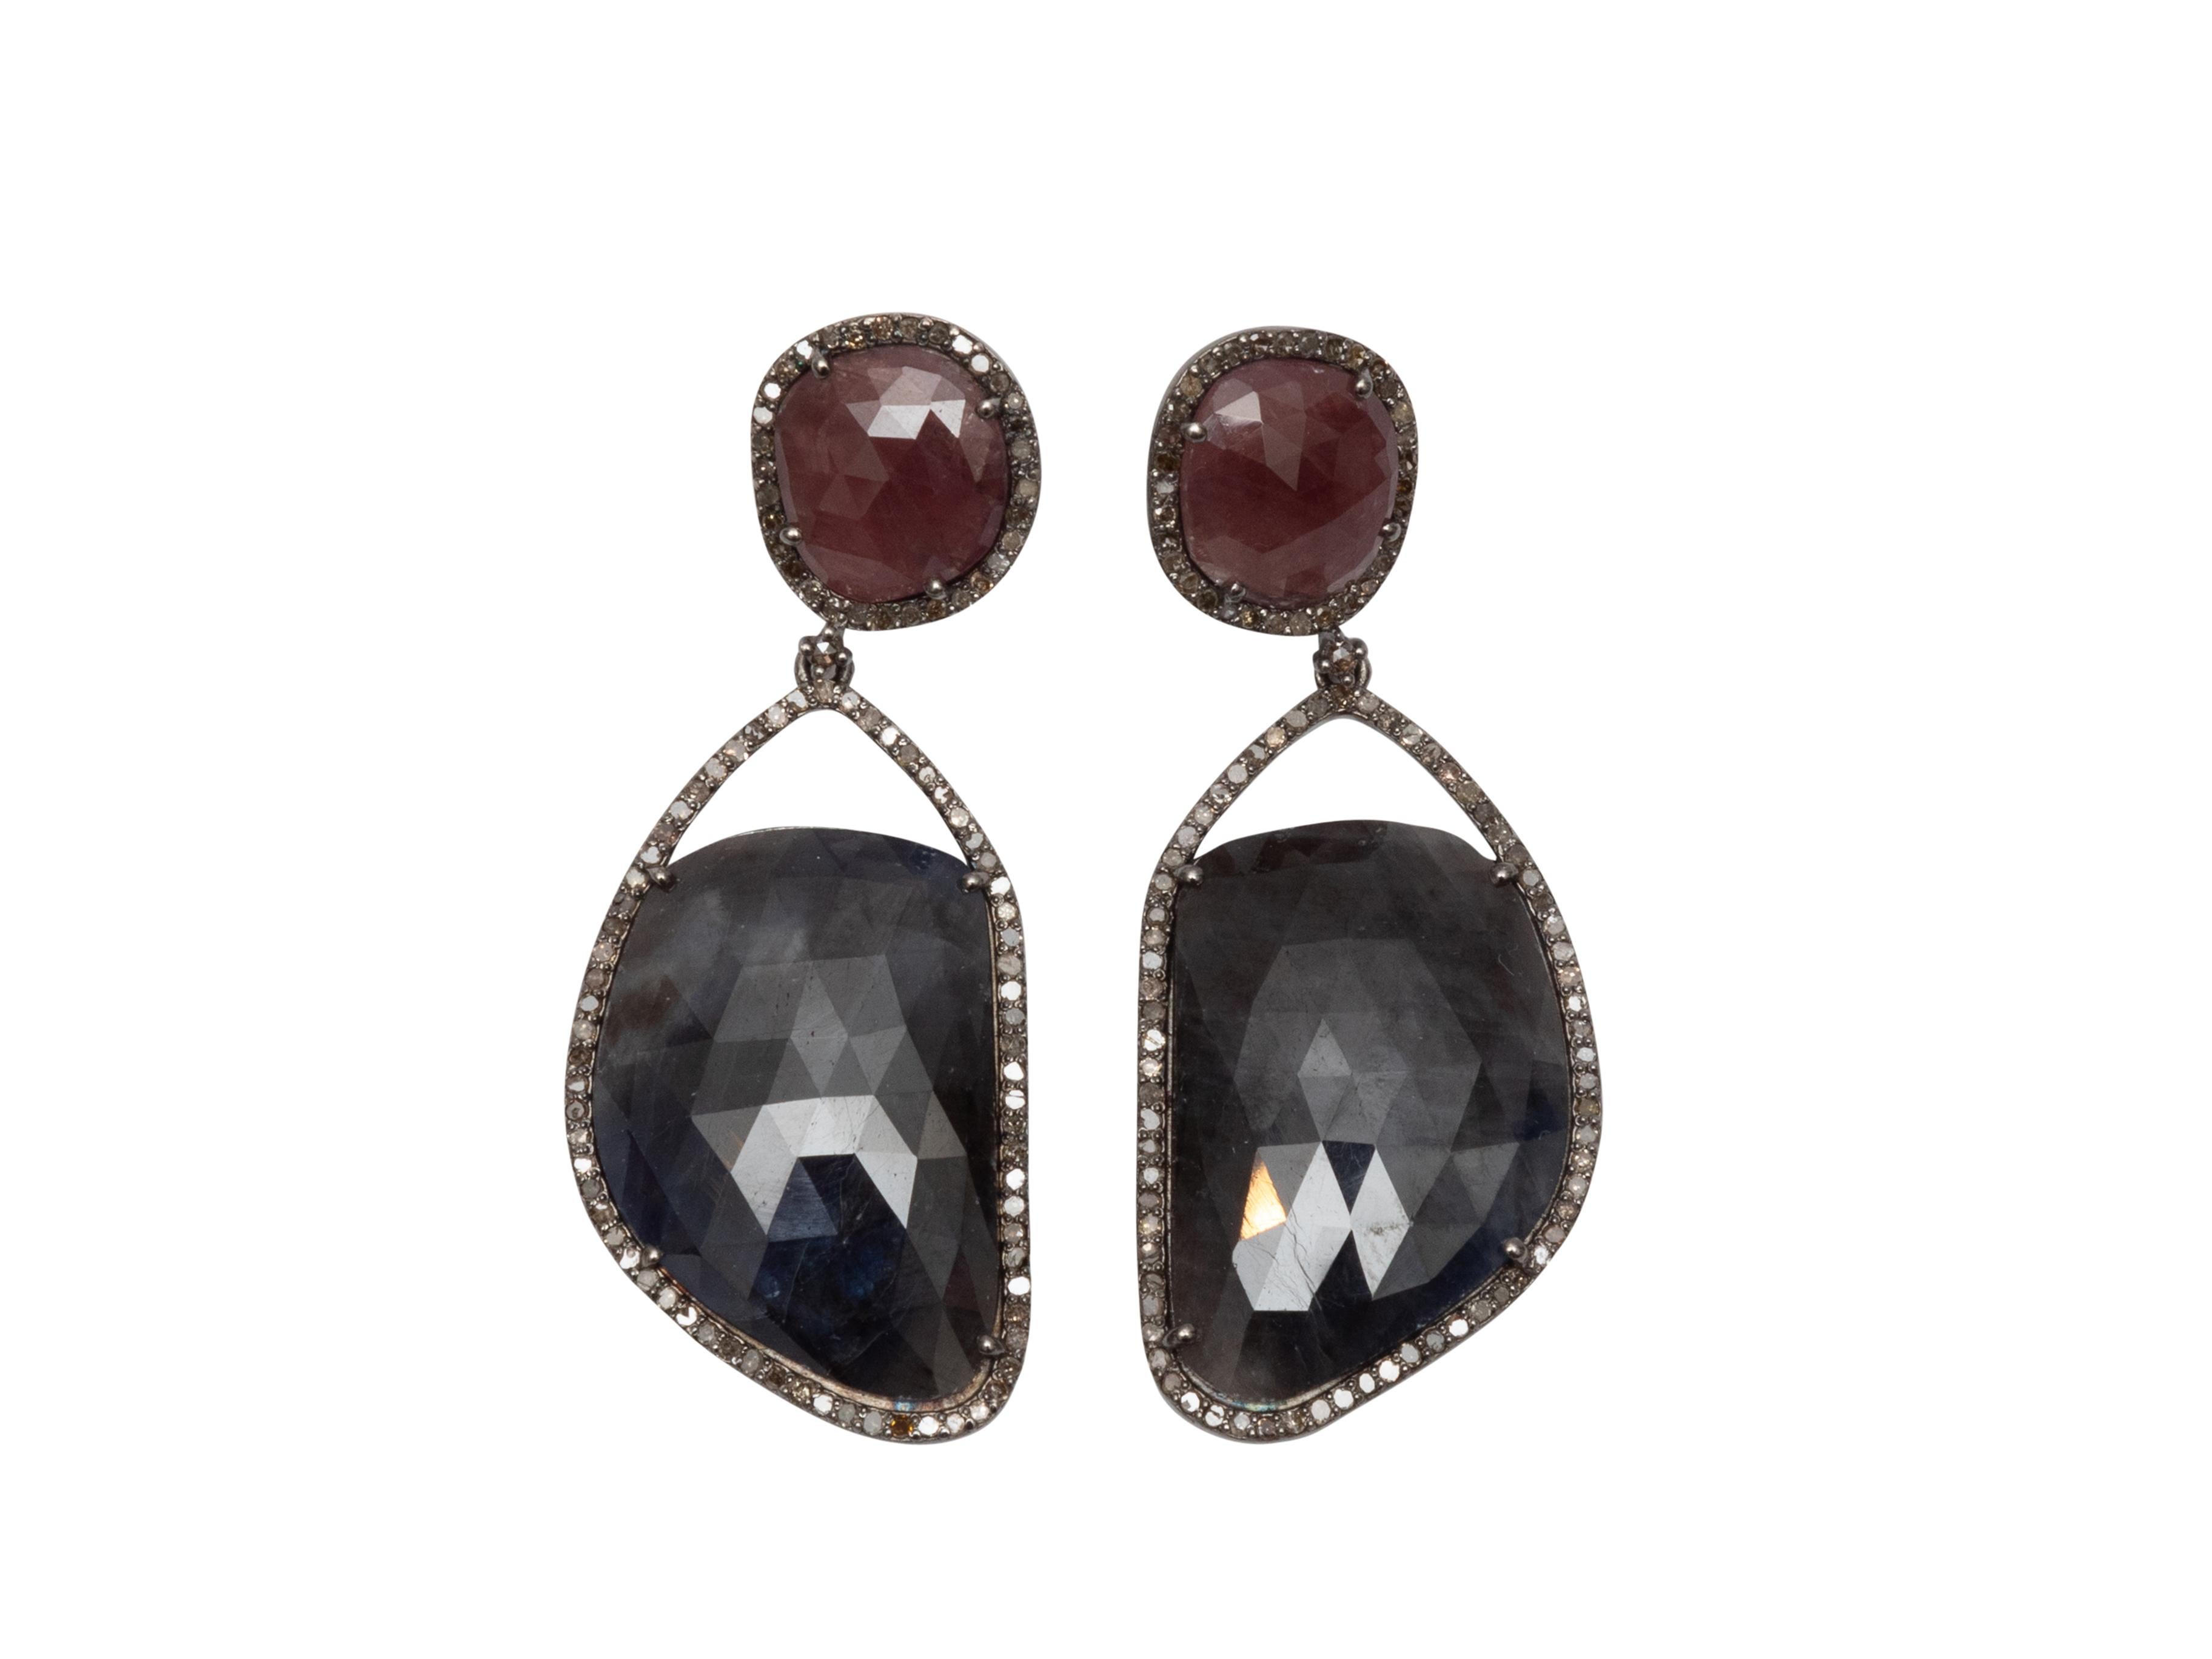 ﻿﻿Product Details: Sapphire, ruby, and pave diamond pierced dangly earrings by Bavna. 1